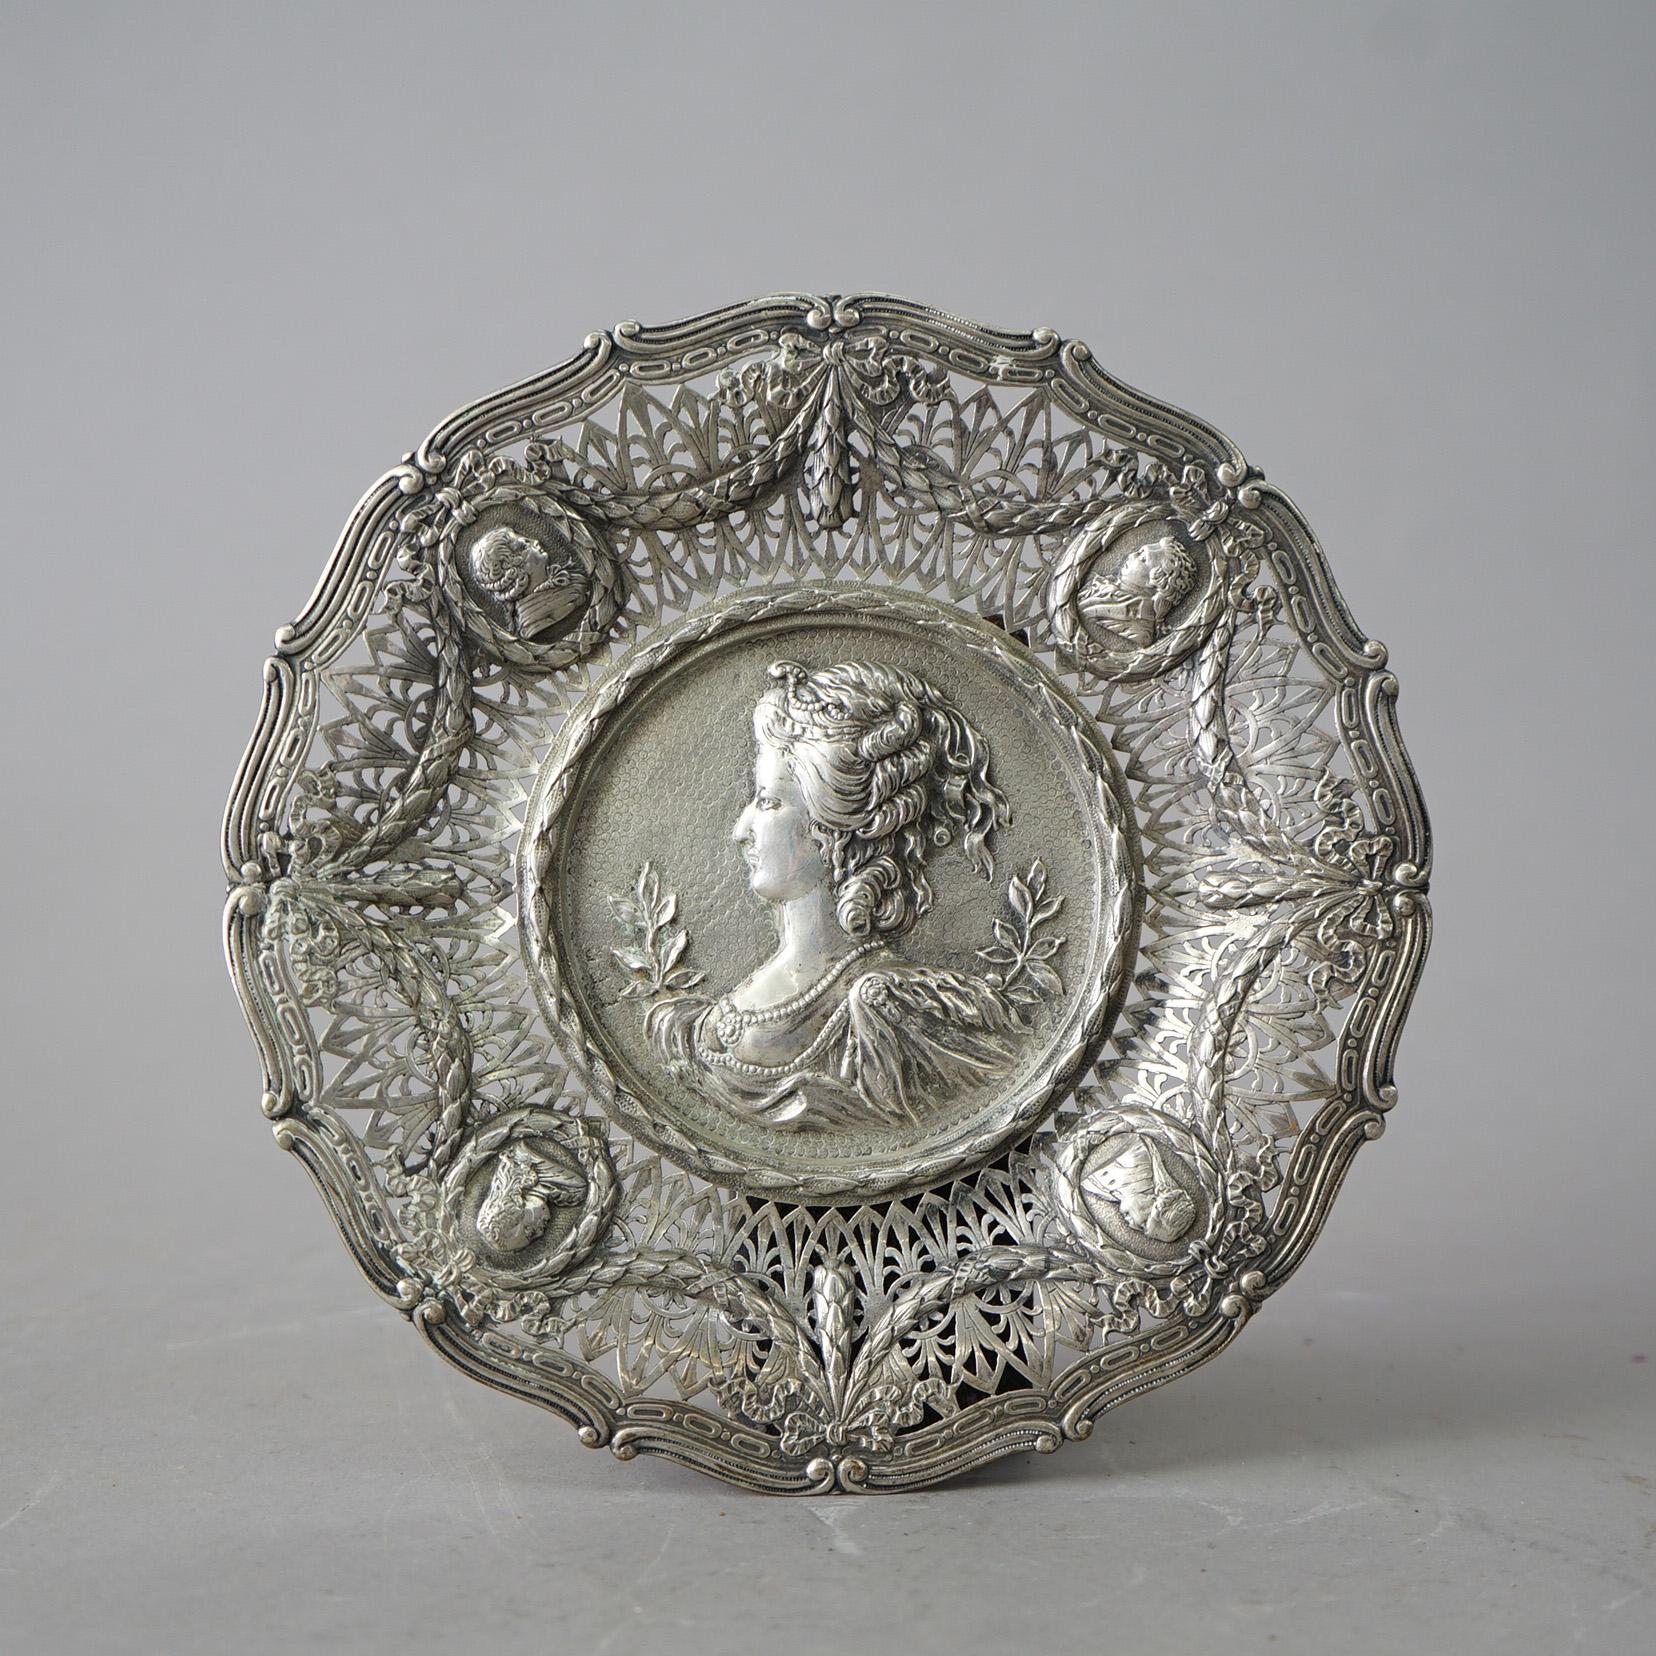 An English silver portrait tray offers silver construction with central portrait and reticulated rim having garland and additional portrait reserves, hallmarked, 19th century

Measures - 9.5